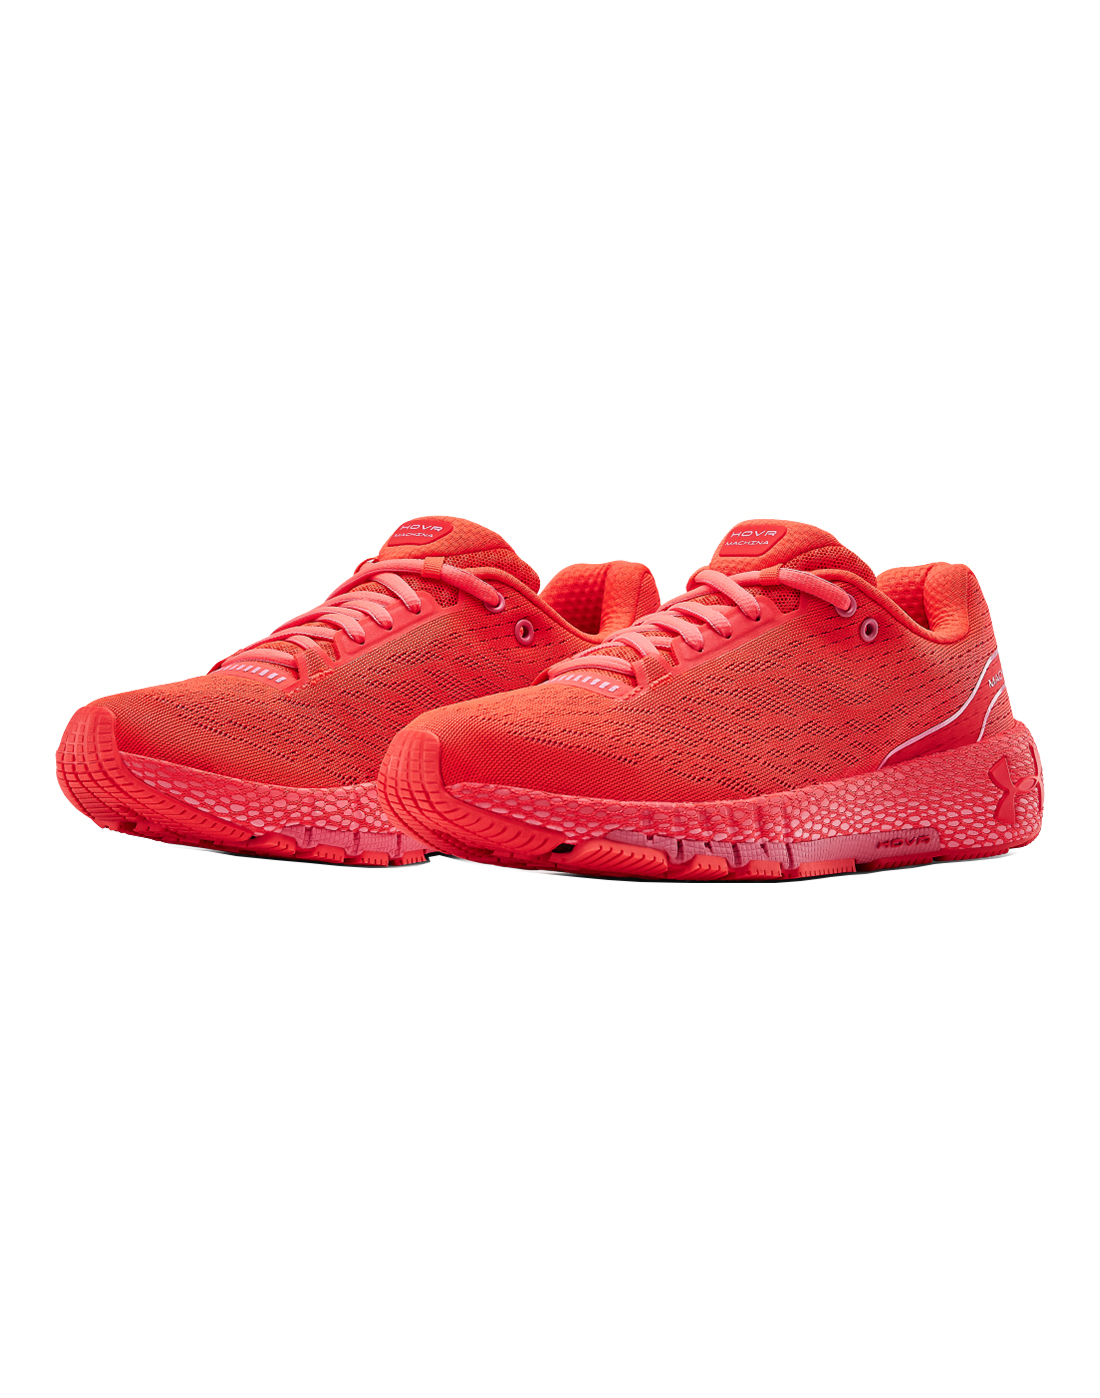 Under Armour Womens Hovr Machina - Red | Life Style Sports IE